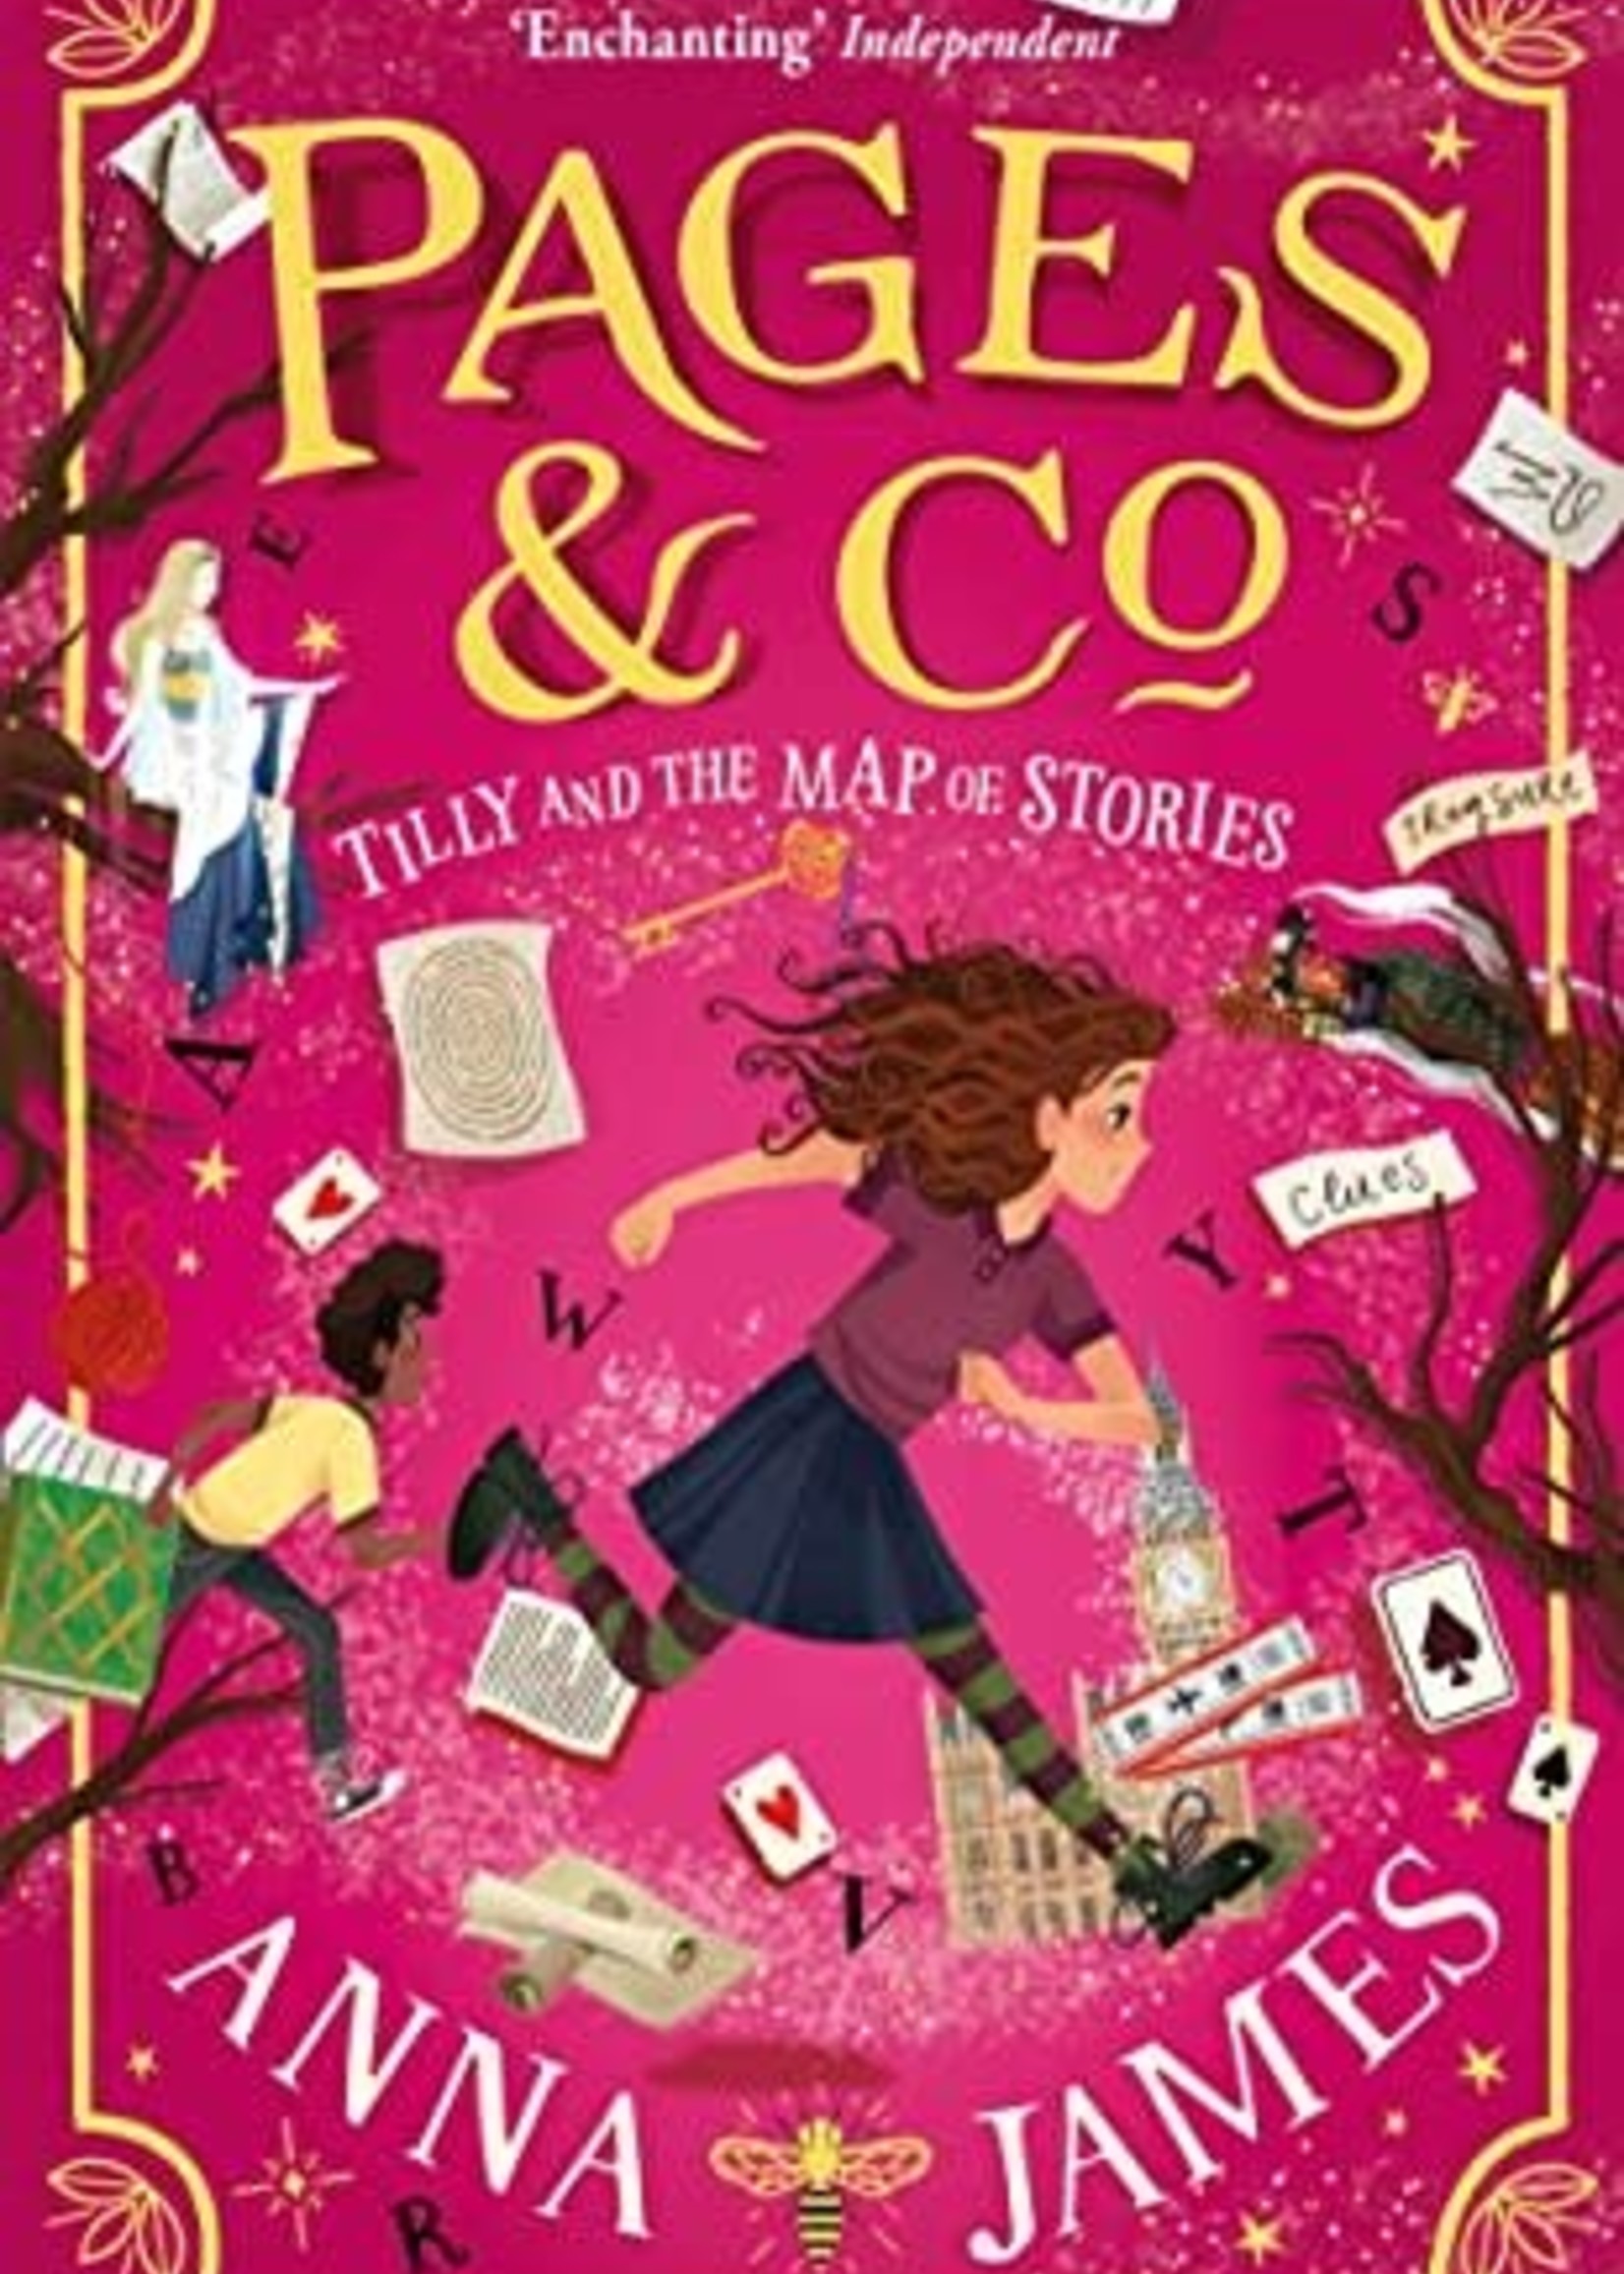 Tilly and the Map of Stories (Pages & Co. #3) by Anna James